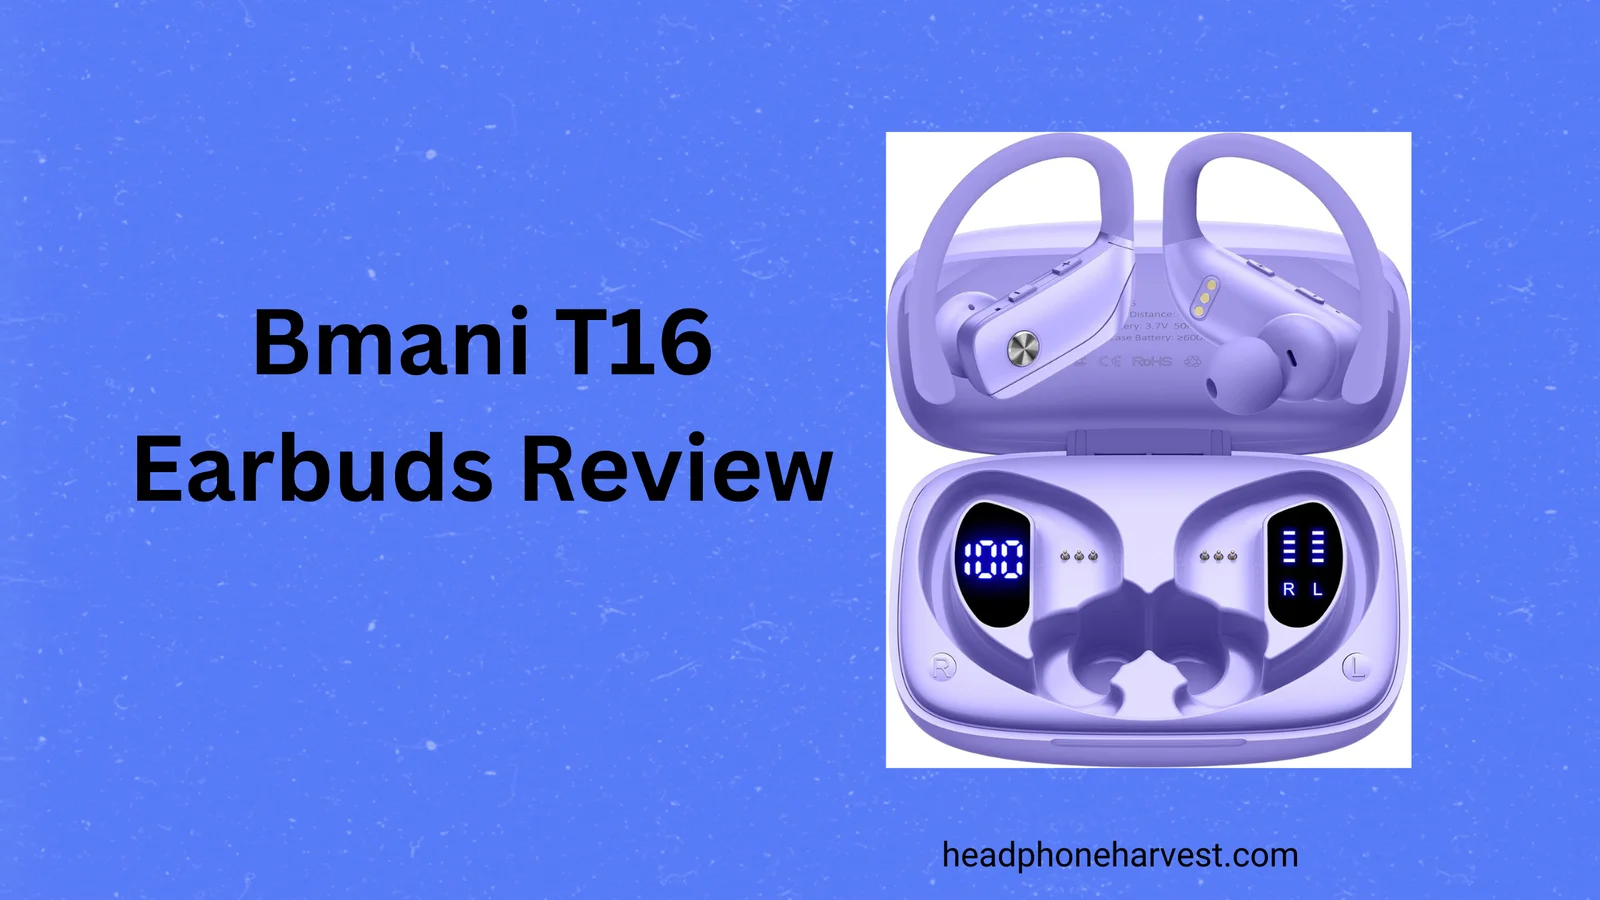 Bmani T16 Earbuds Review